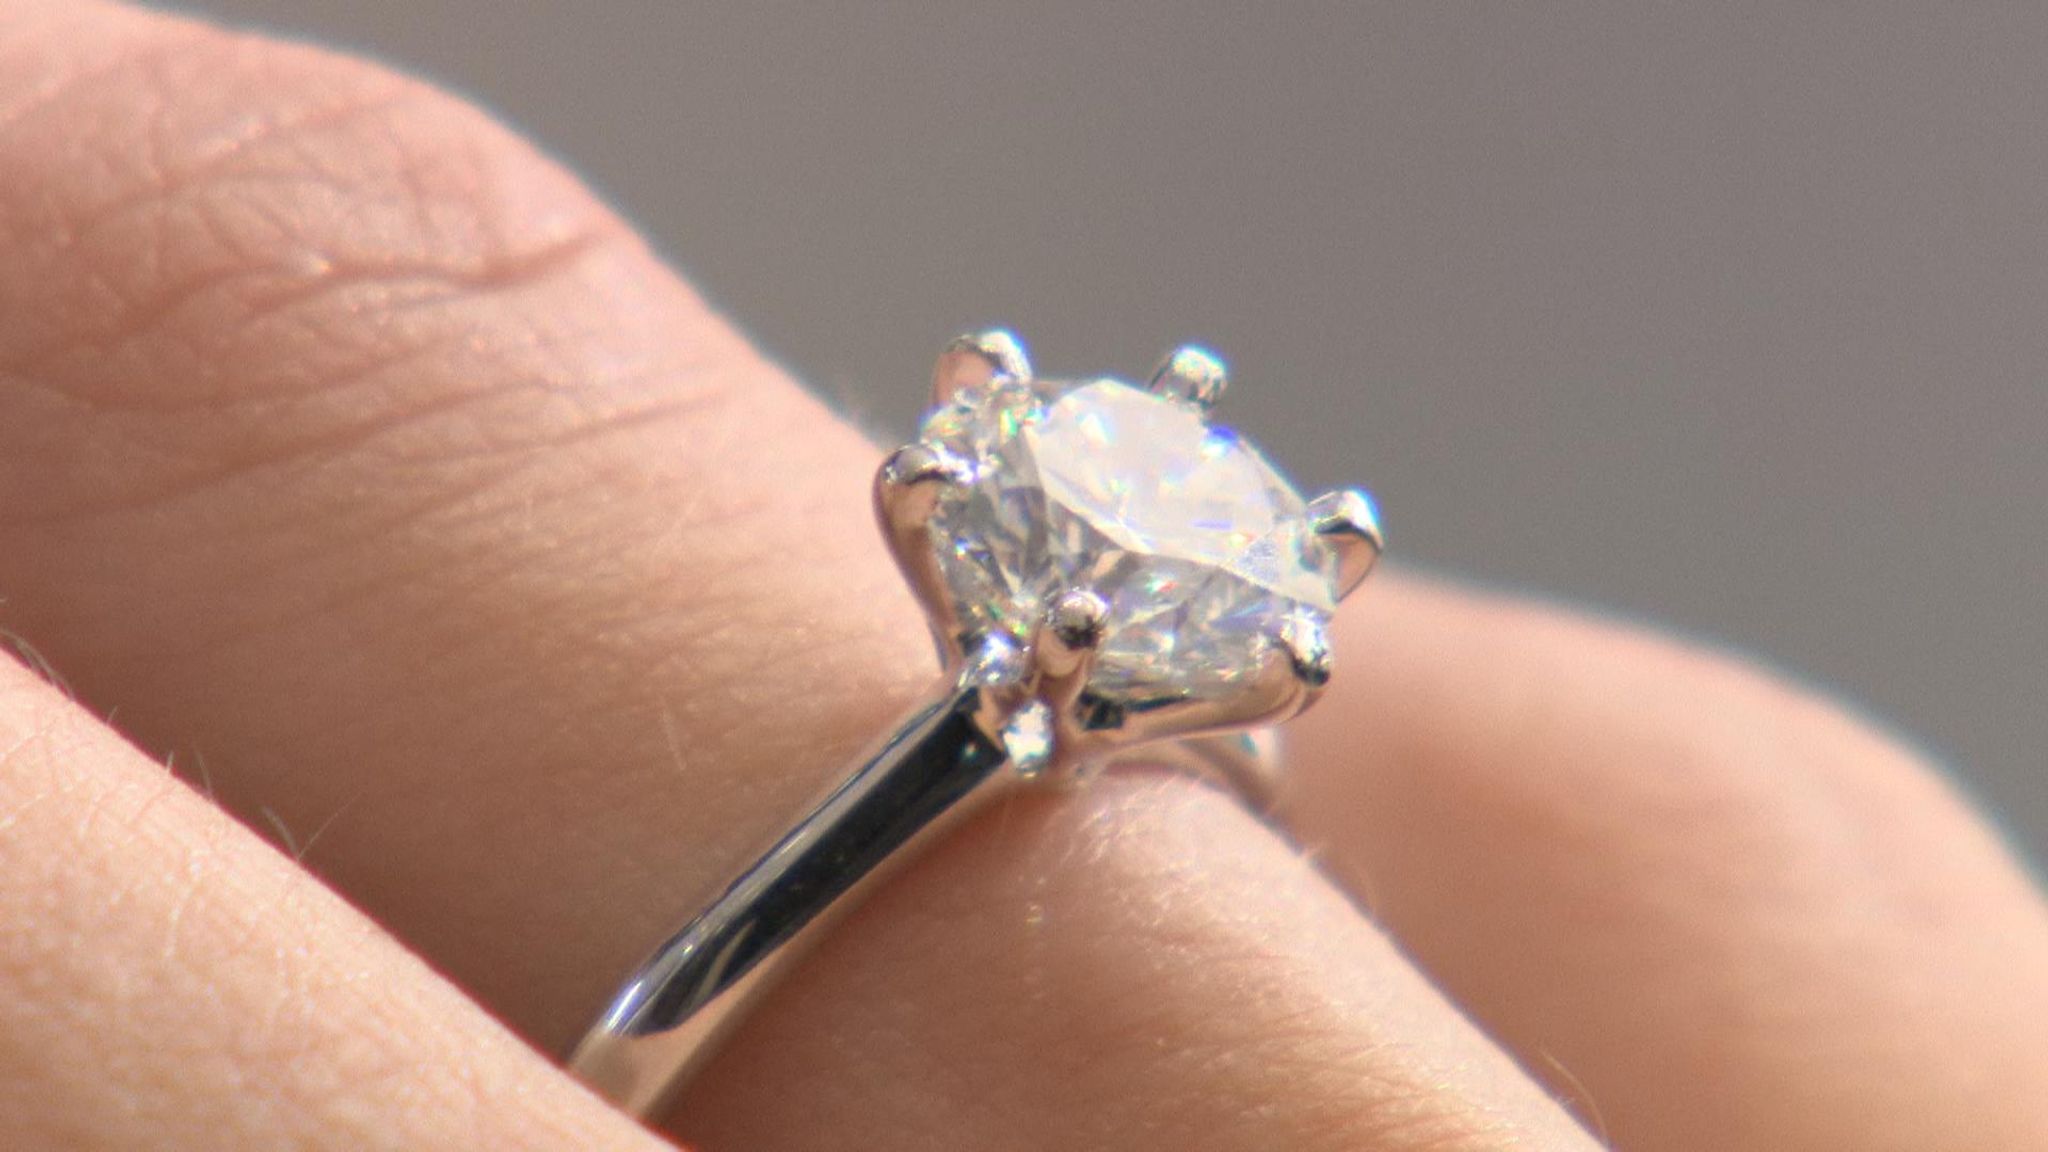 Lab-grown diamonds almost impossible to differentiate from real gems | World News | Sky News